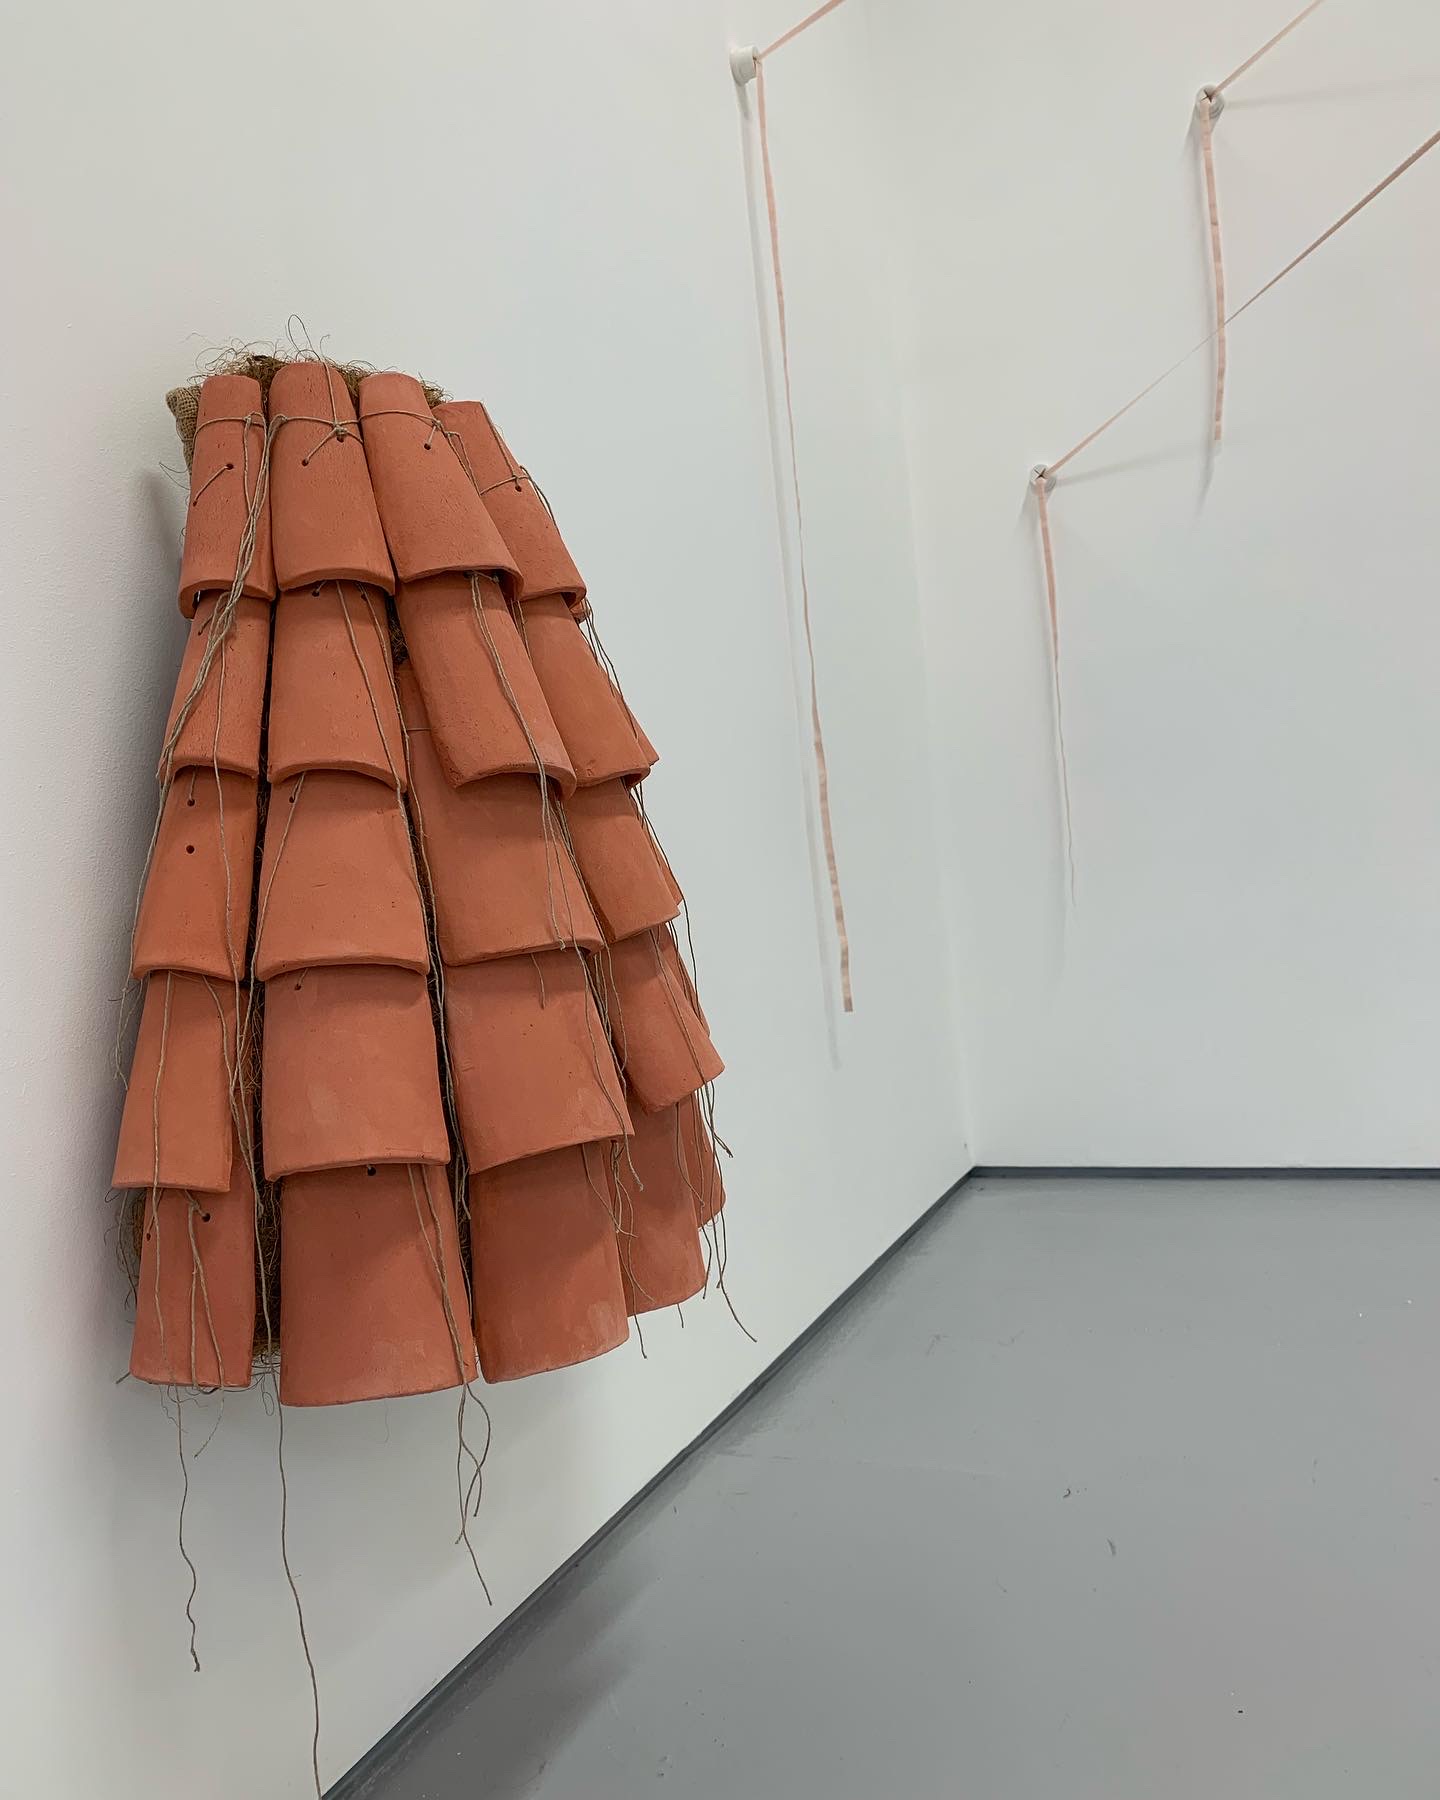 A wall hung sculpture made of terracotta tiles in the shape of a skirt.